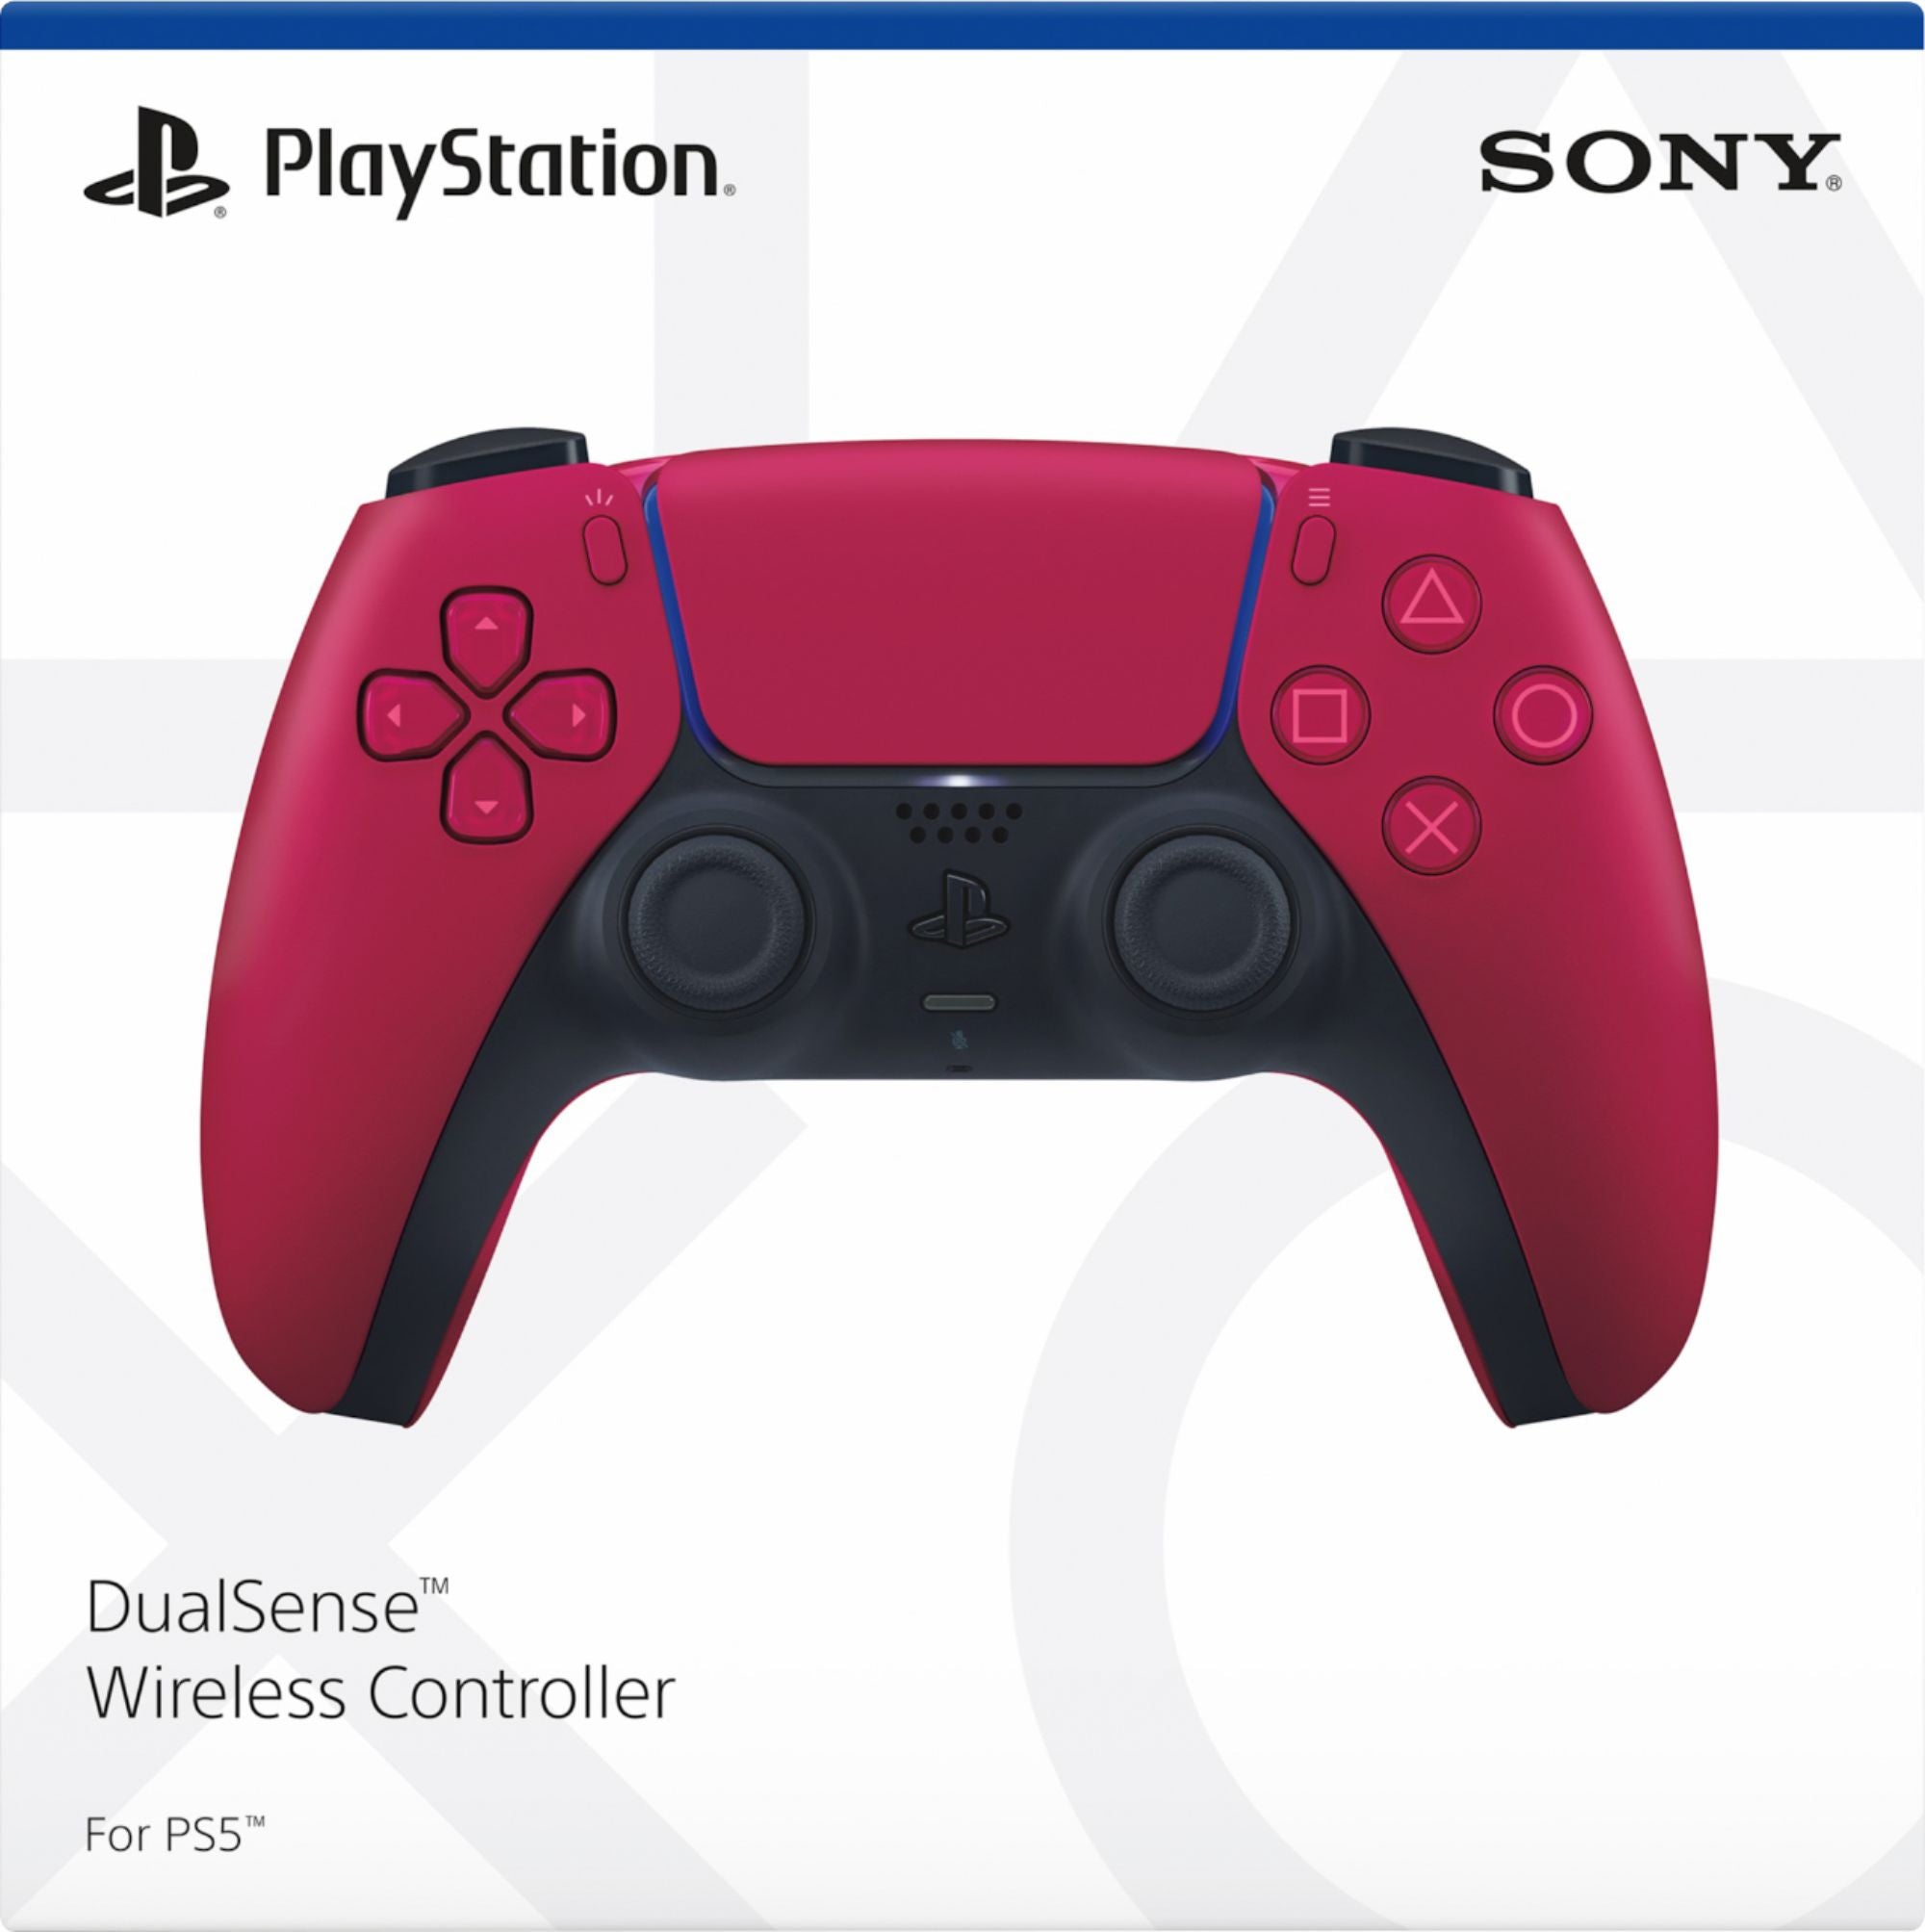 PlayStation 5 Disc Edition with Two Controllers White and Cosmic Red DualSense and Mytrix Hard Shell Protective Controller Case - PS5 Gaming Console